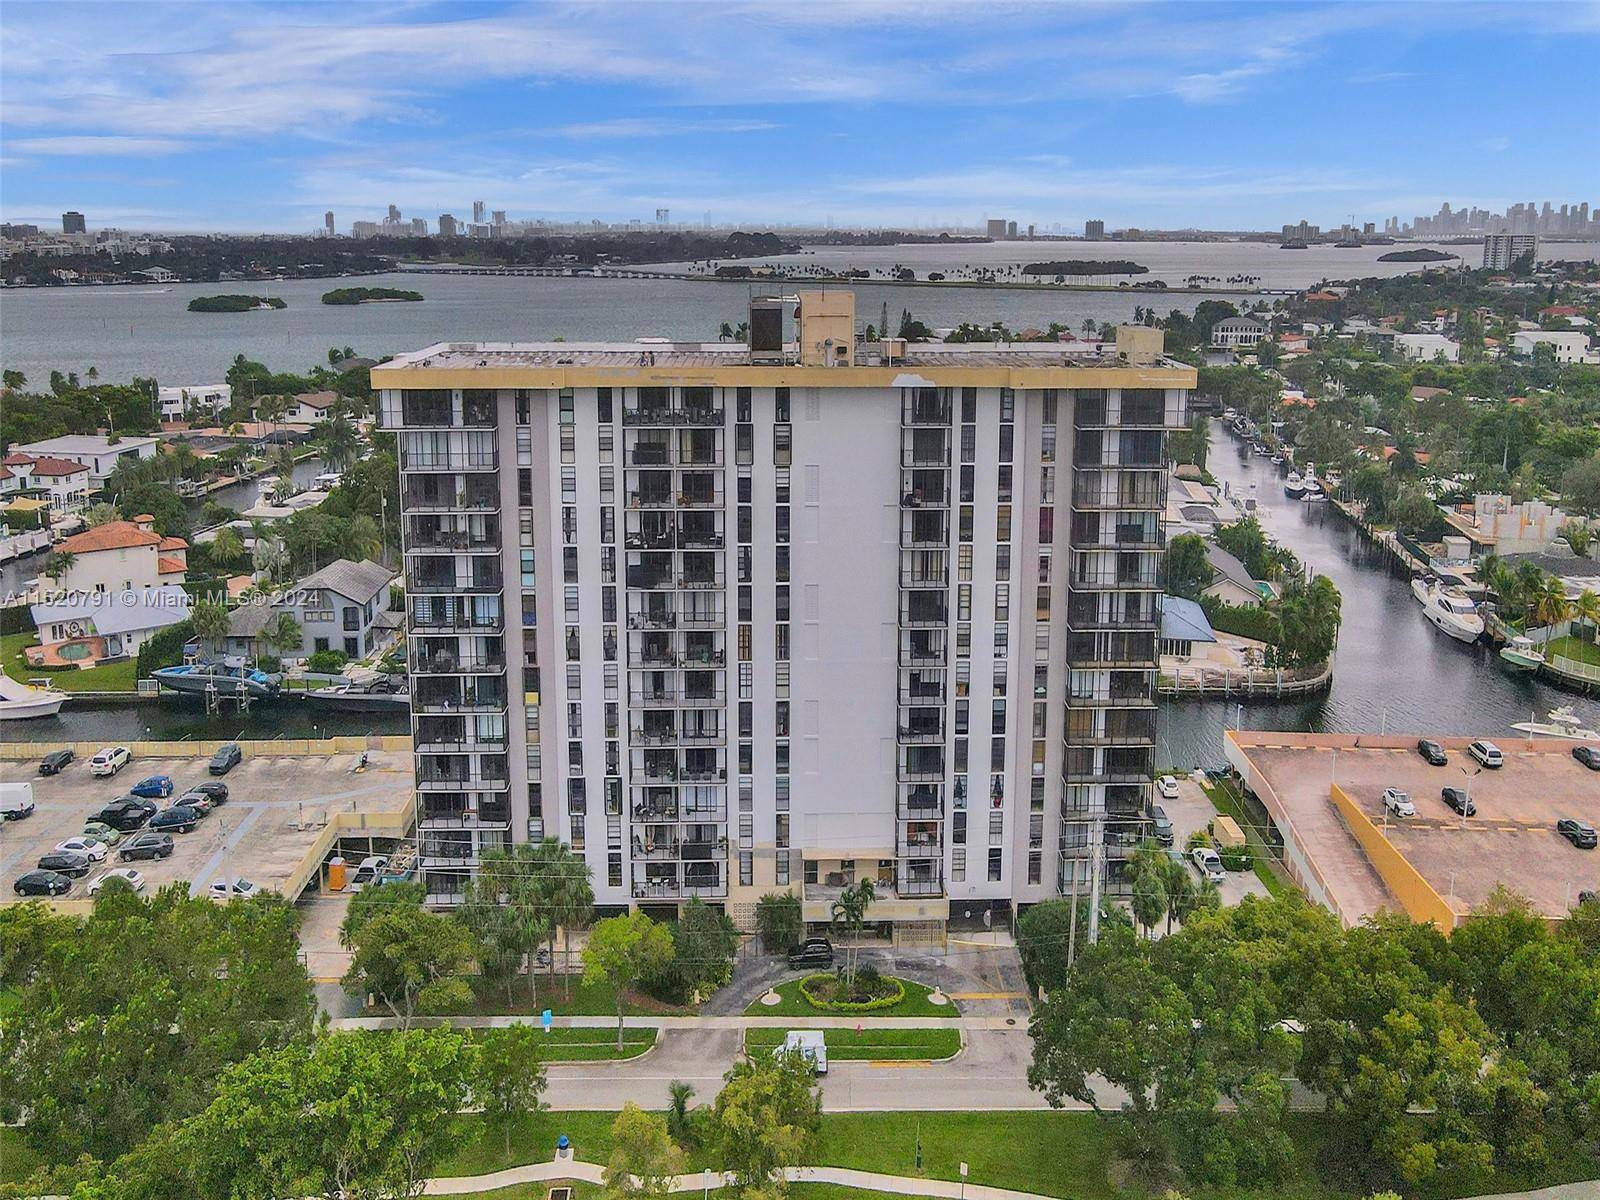 Welcome to this stunning, fully updated corner unit Penthouse in vibrant North Miami.